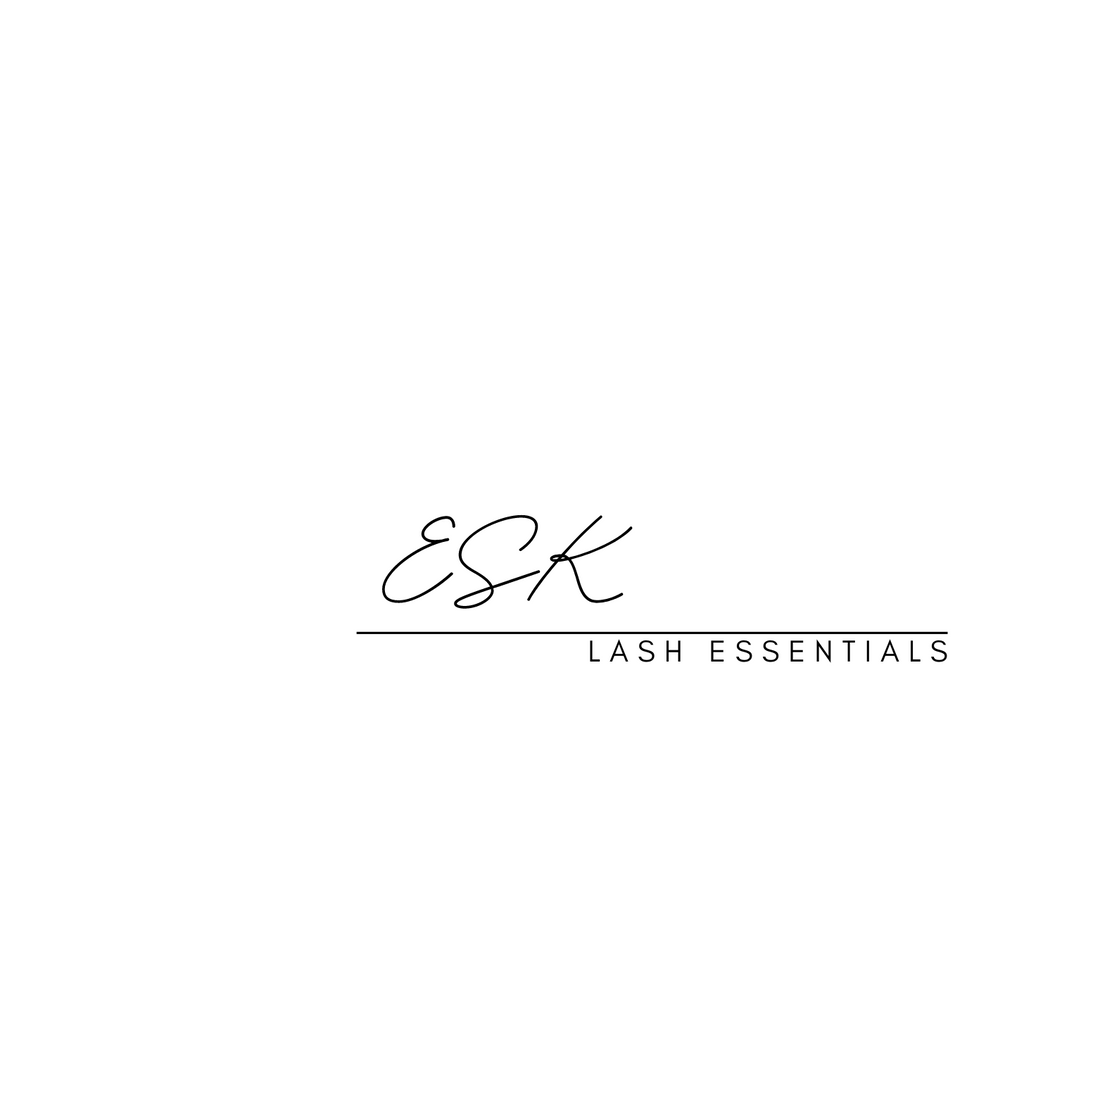 ESK Lash Supplies: Ultimate Wellbeing ESK eyelash extension products and supplies 8/11/23 6:34pm